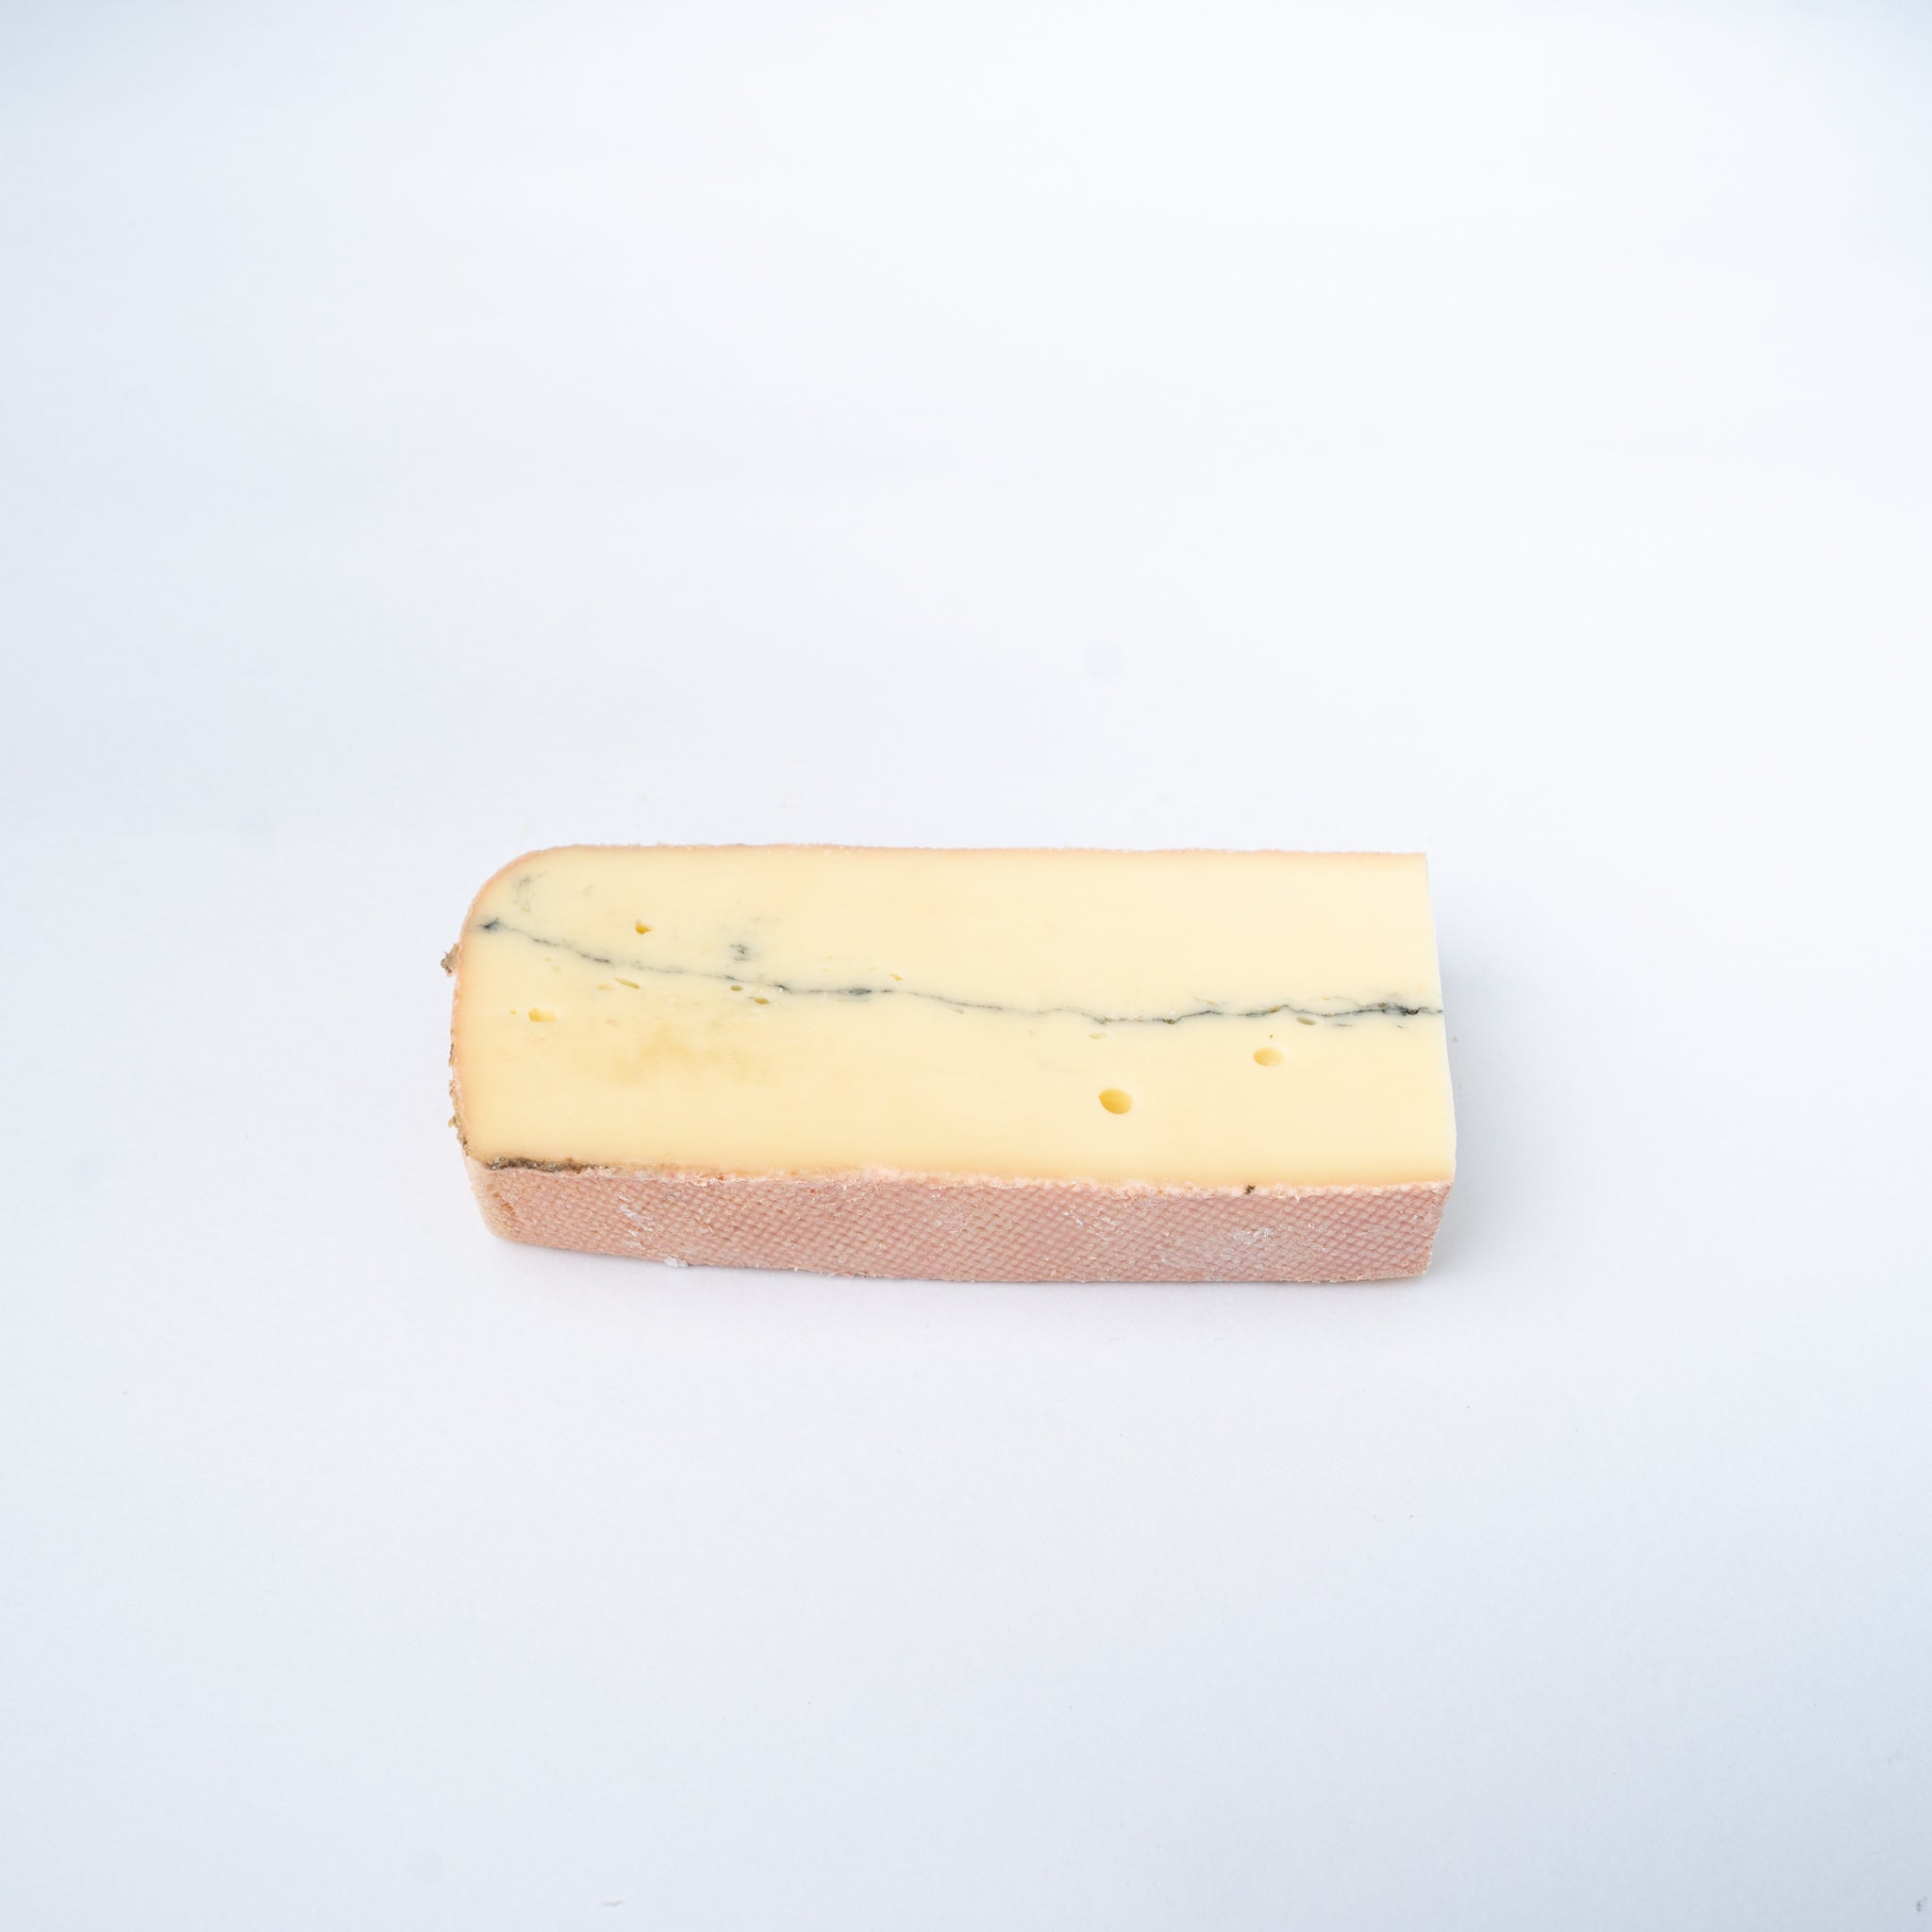 A 200g wedge of Morbier cheese.